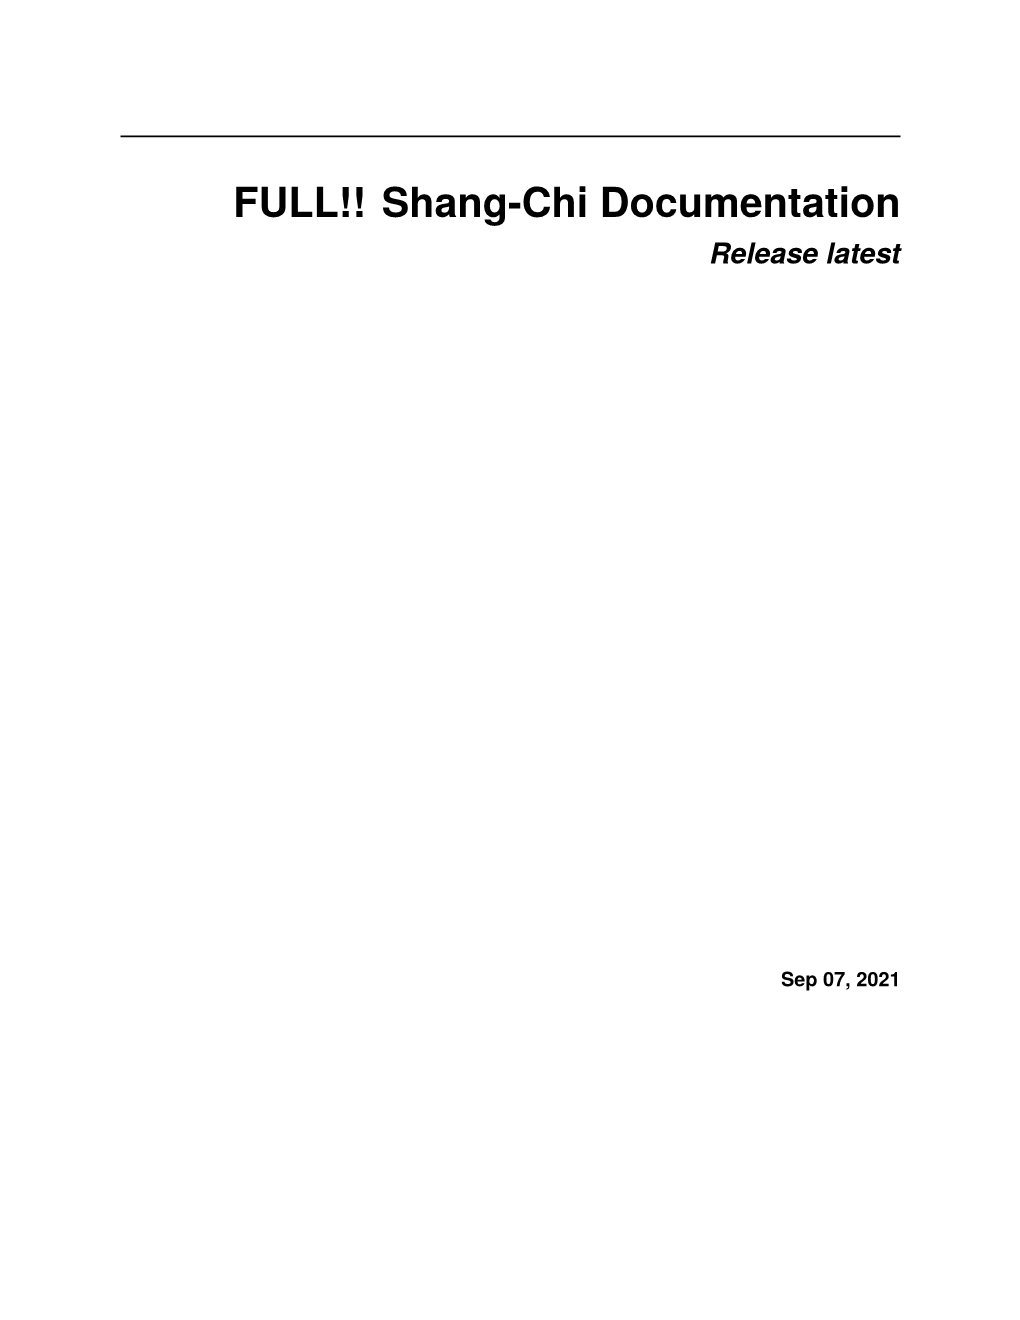 FULL!! Shang-Chi Documentation Release Latest